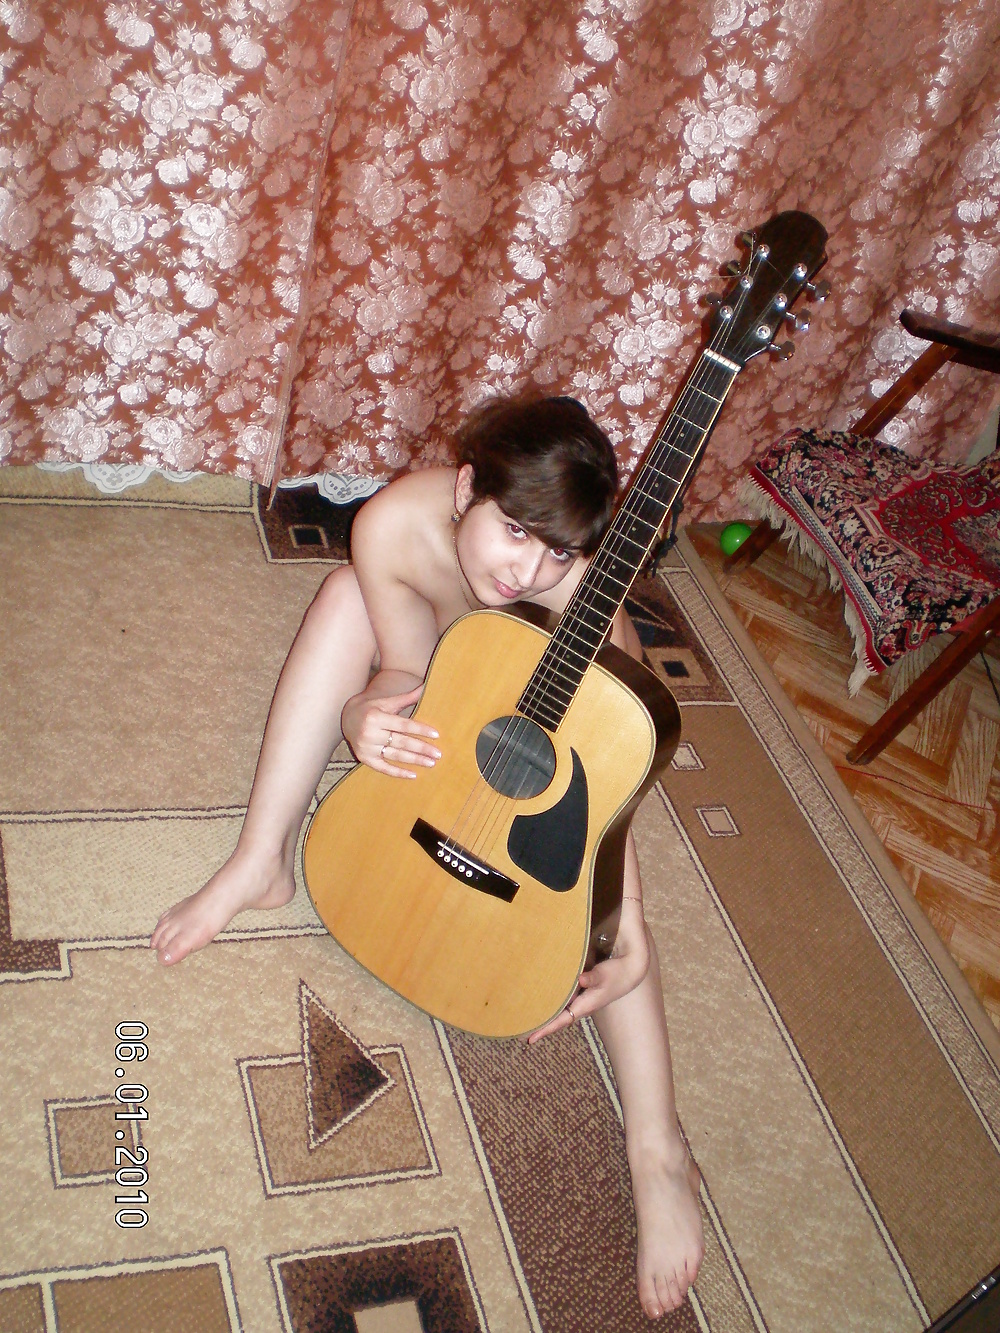 cute girl with a guitar porn gallery